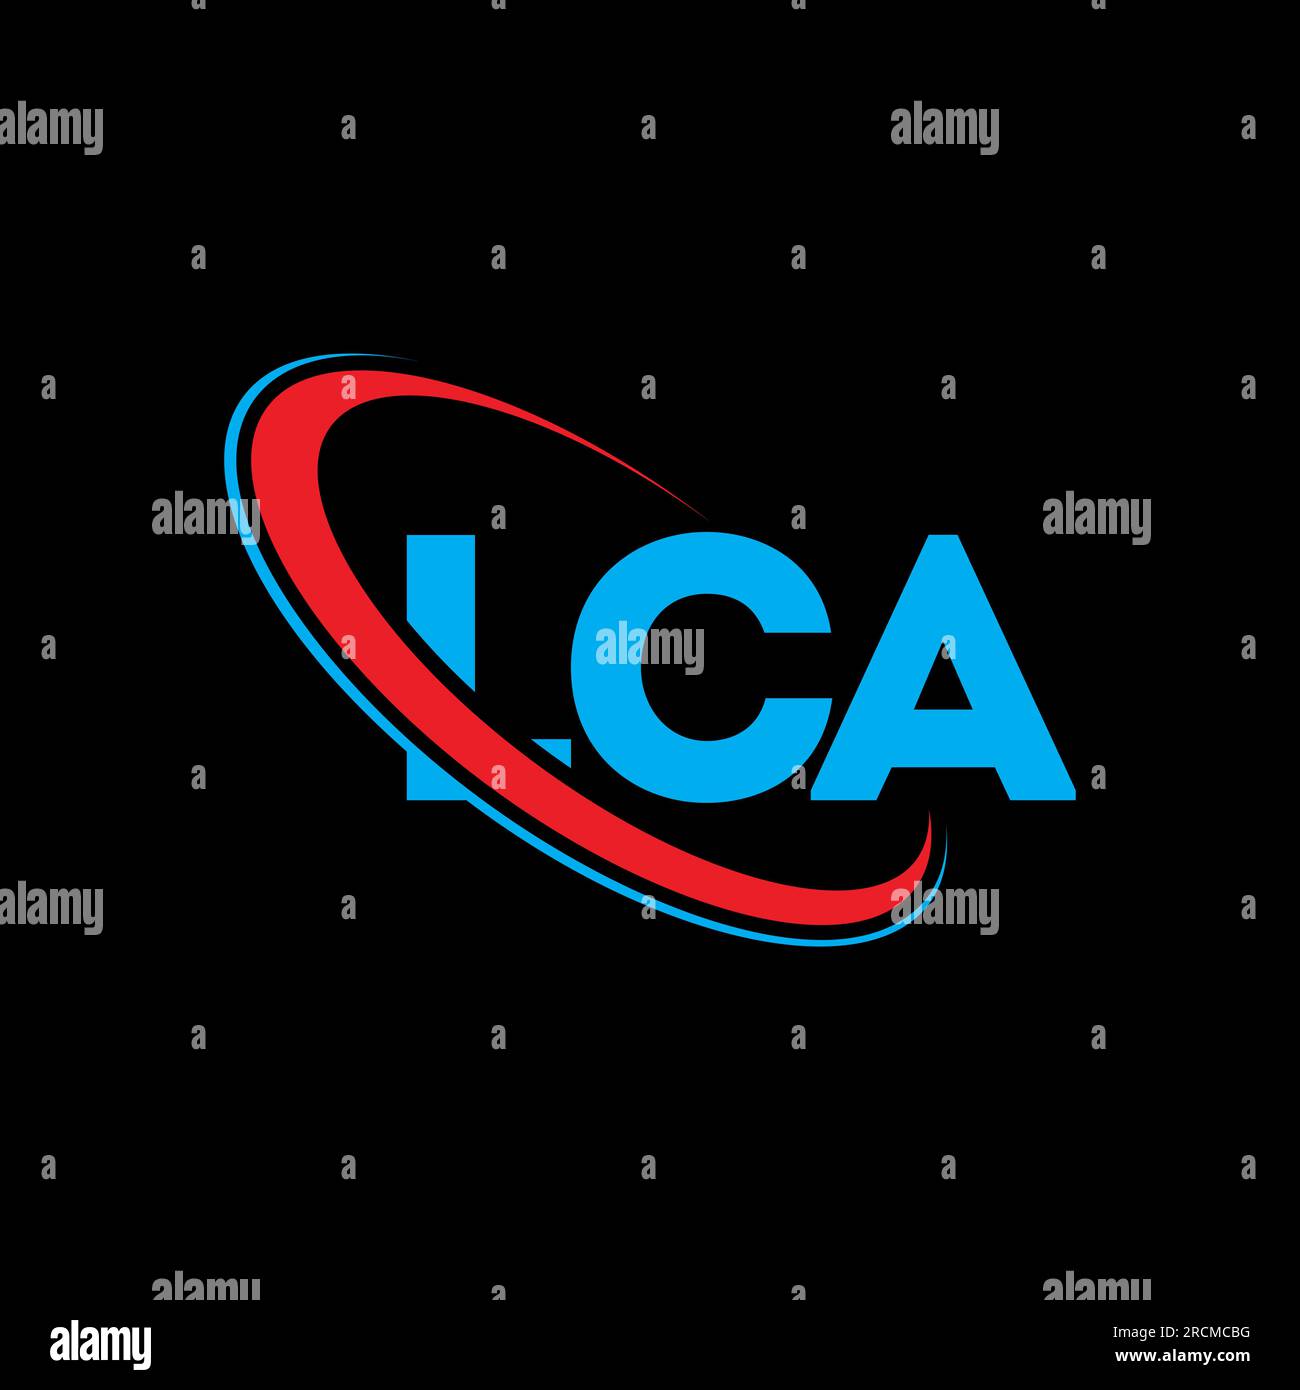 LCA logo. LCA letter. LCA letter logo design. Initials LCA logo linked with circle and uppercase monogram logo. LCA typography for technology, busines Stock Vector